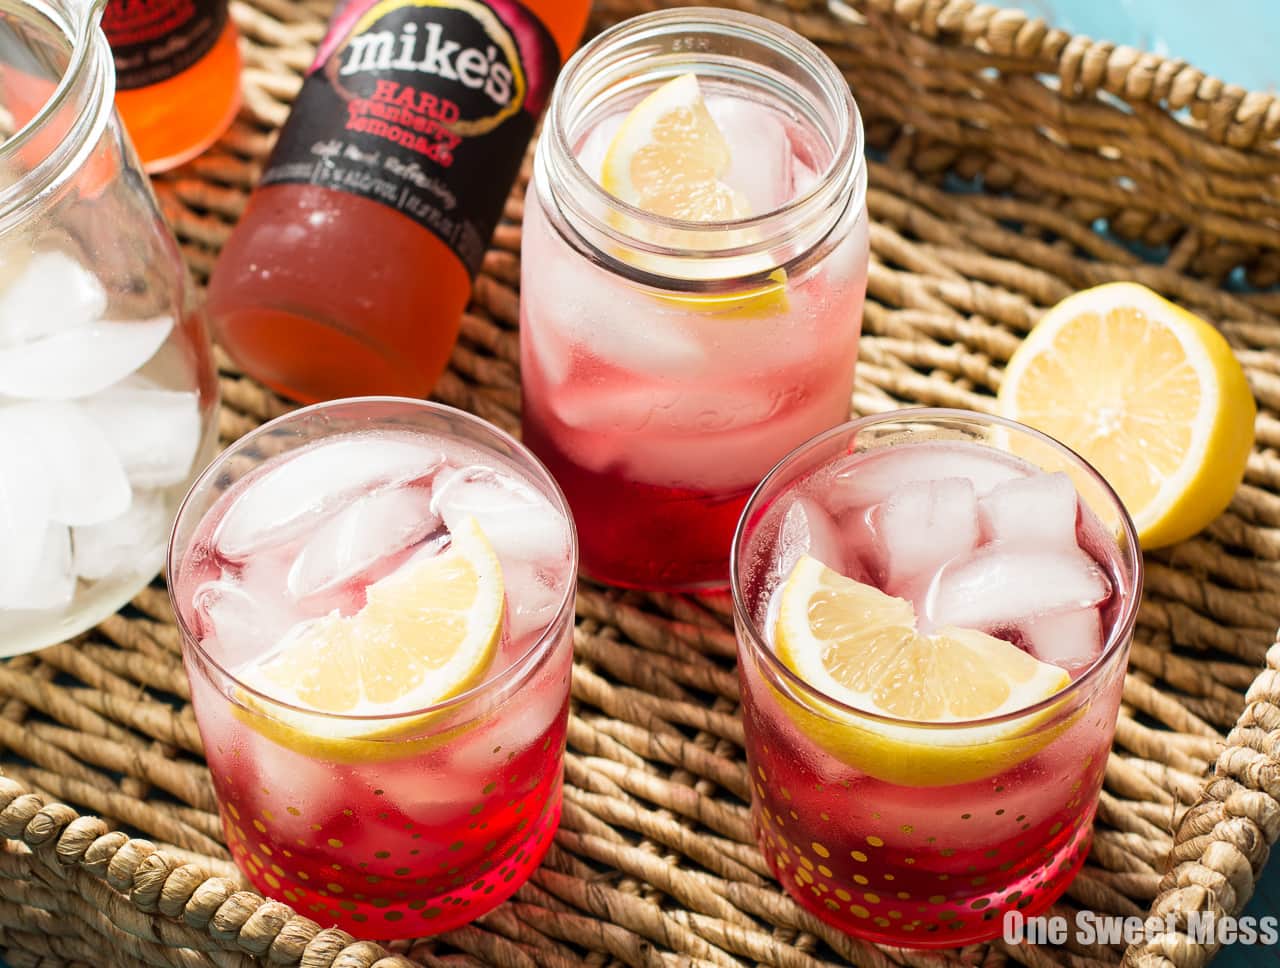 Cran-Apple Splash Cocktail | A mixture of mike's hard cranberry lemonade, apple cider, and apple-infused whiskey.